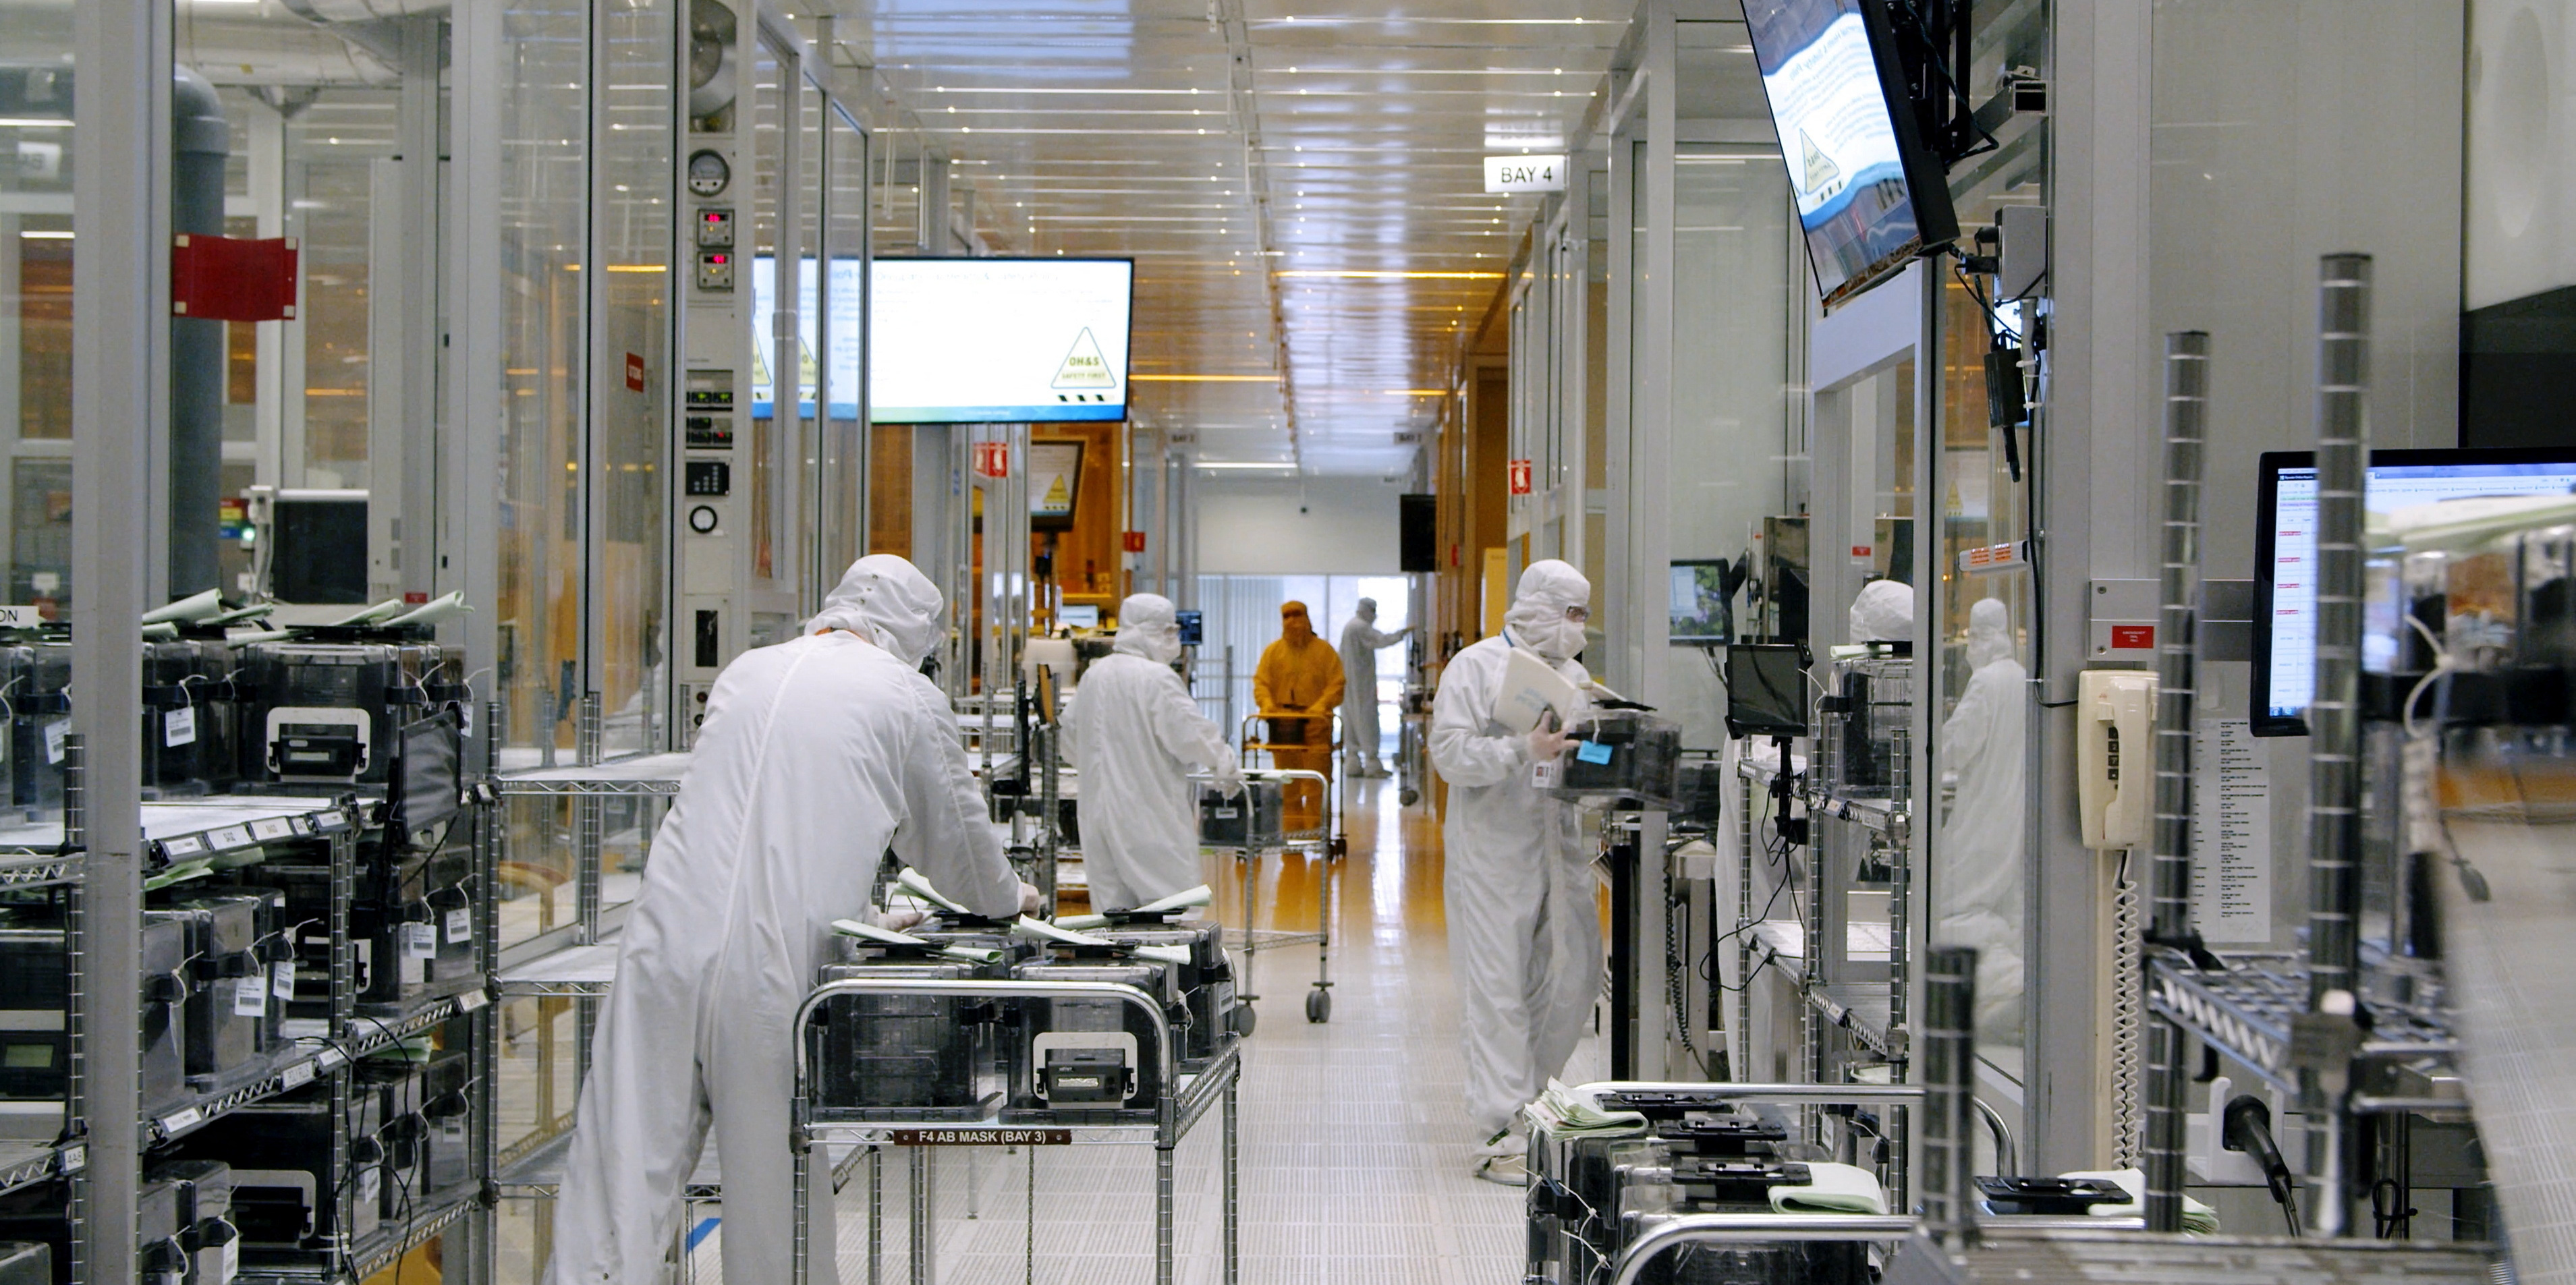 Clean room of SkyWater Technology Inc where computer chips are made, in Bloomington